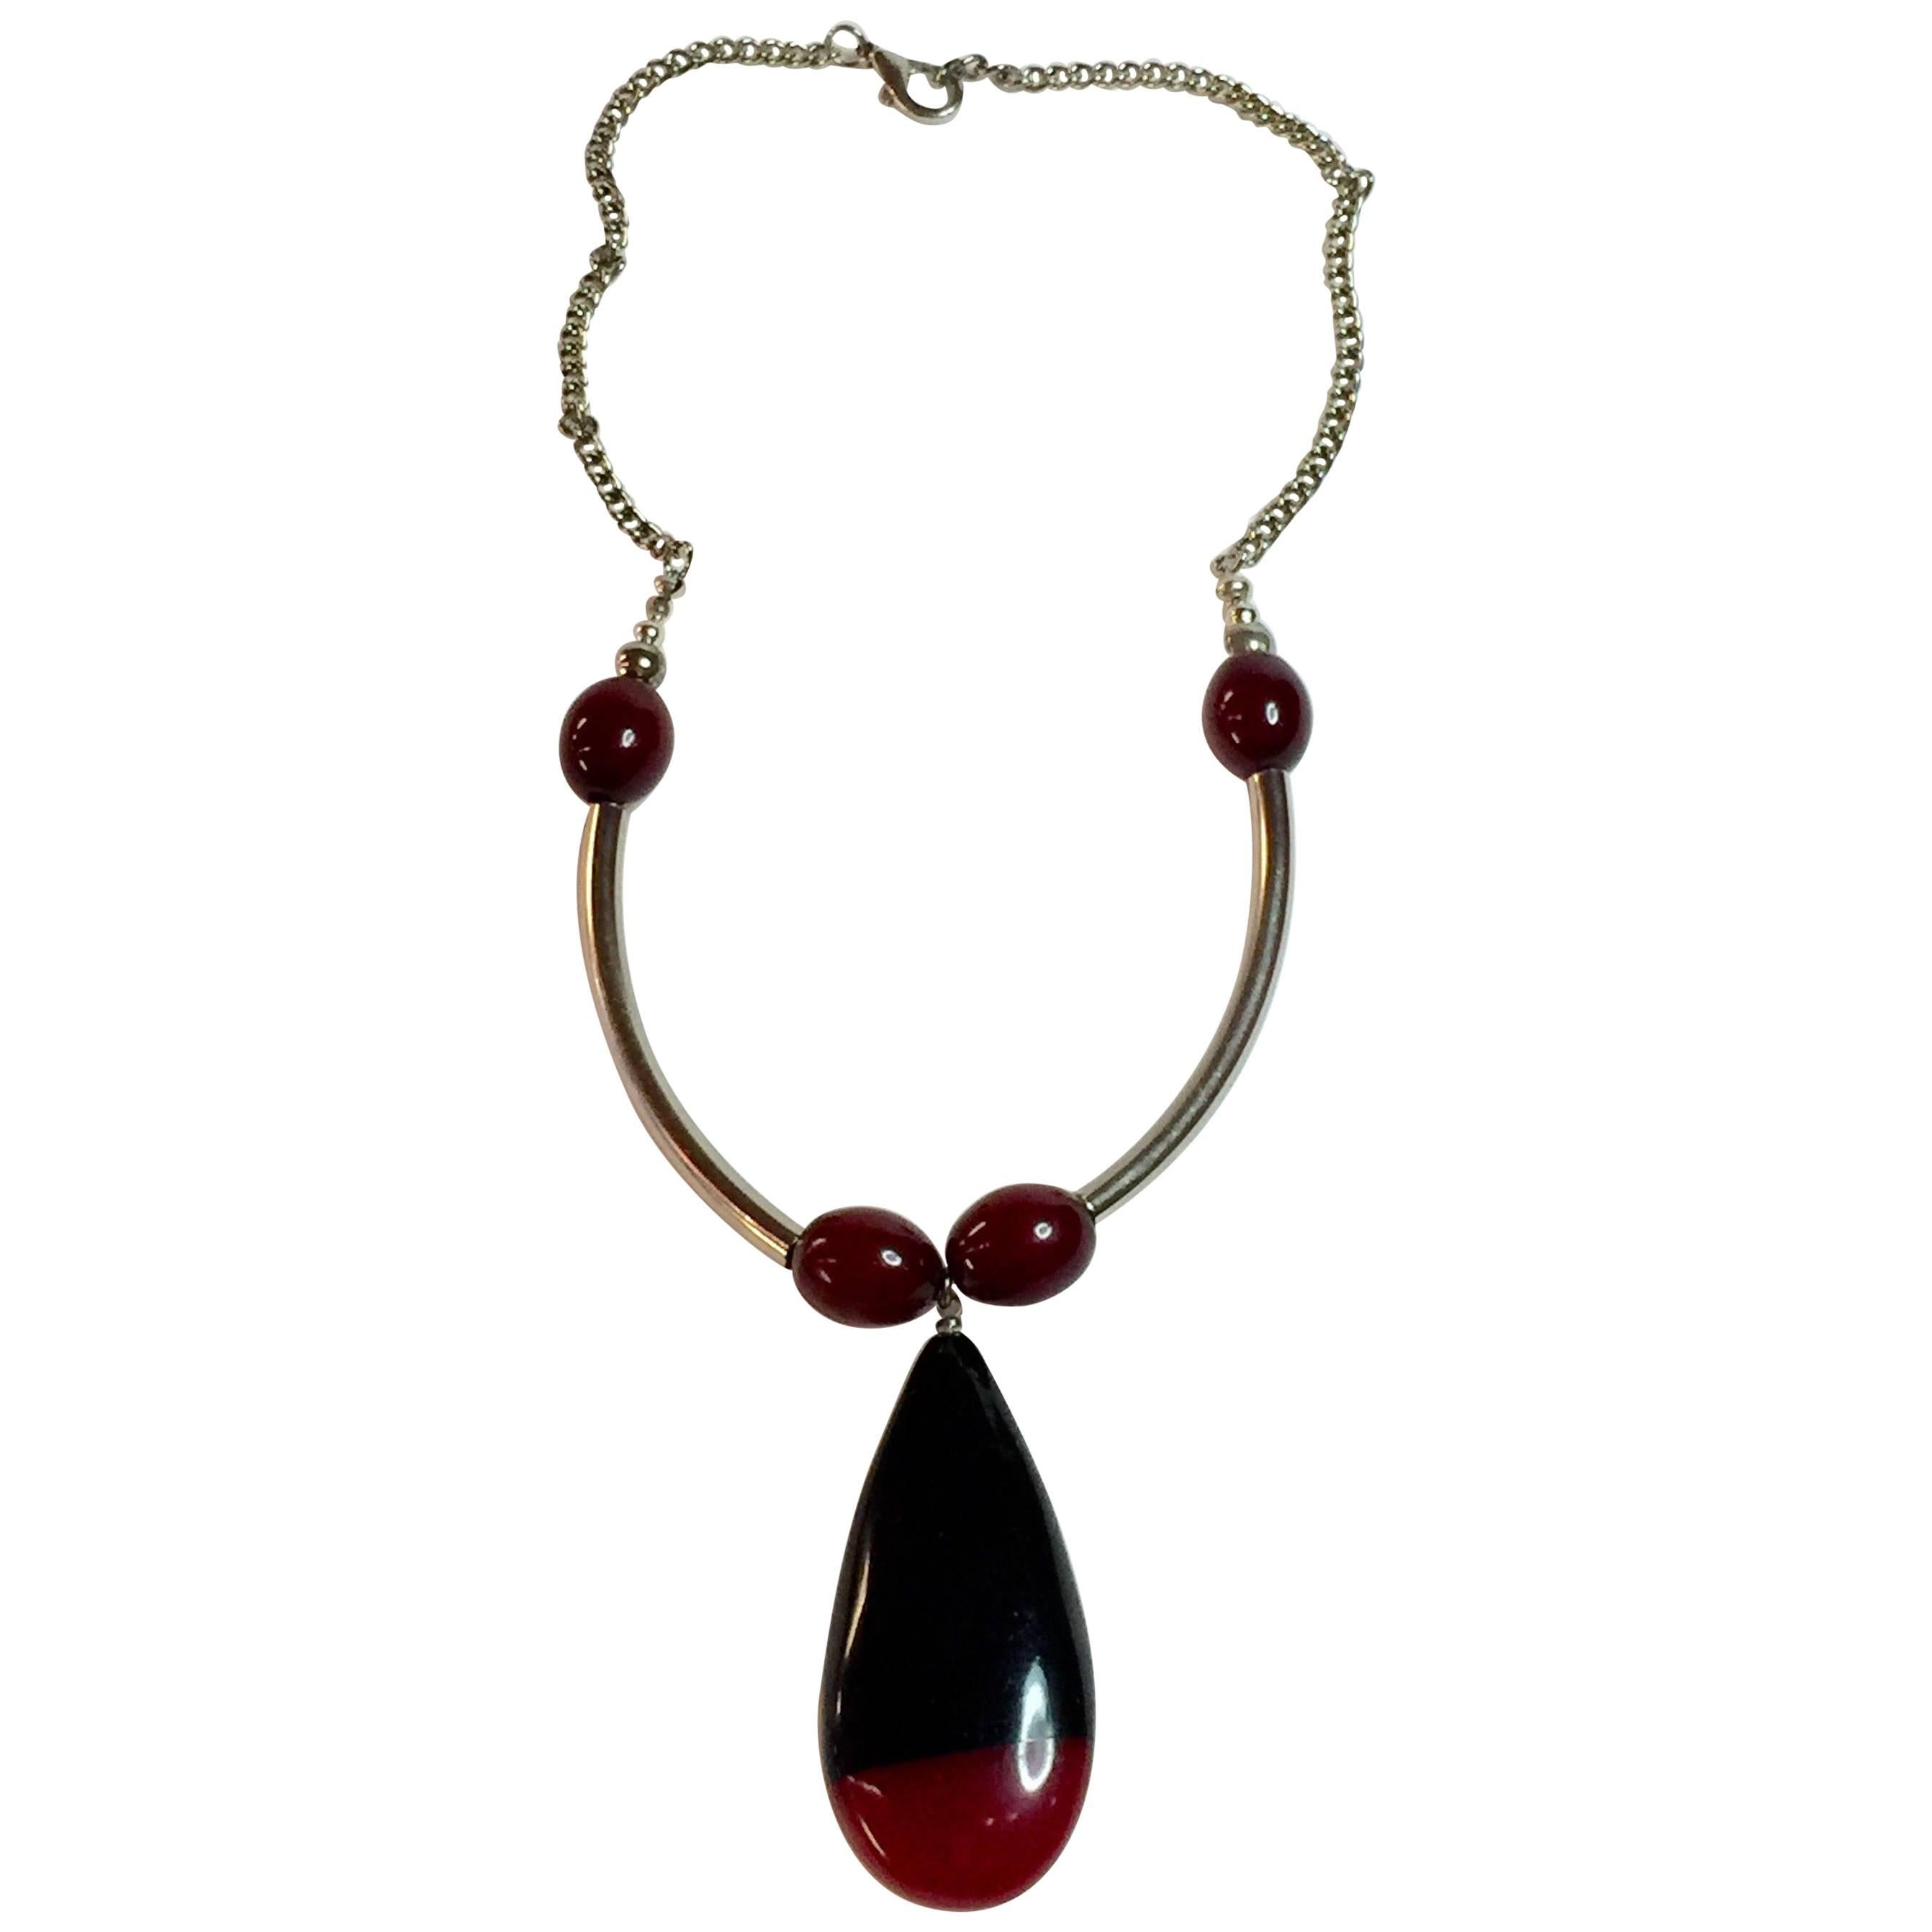 1930s Art Deco German Red Black Galalith Chrome Necklace Jacob Bengel For Sale